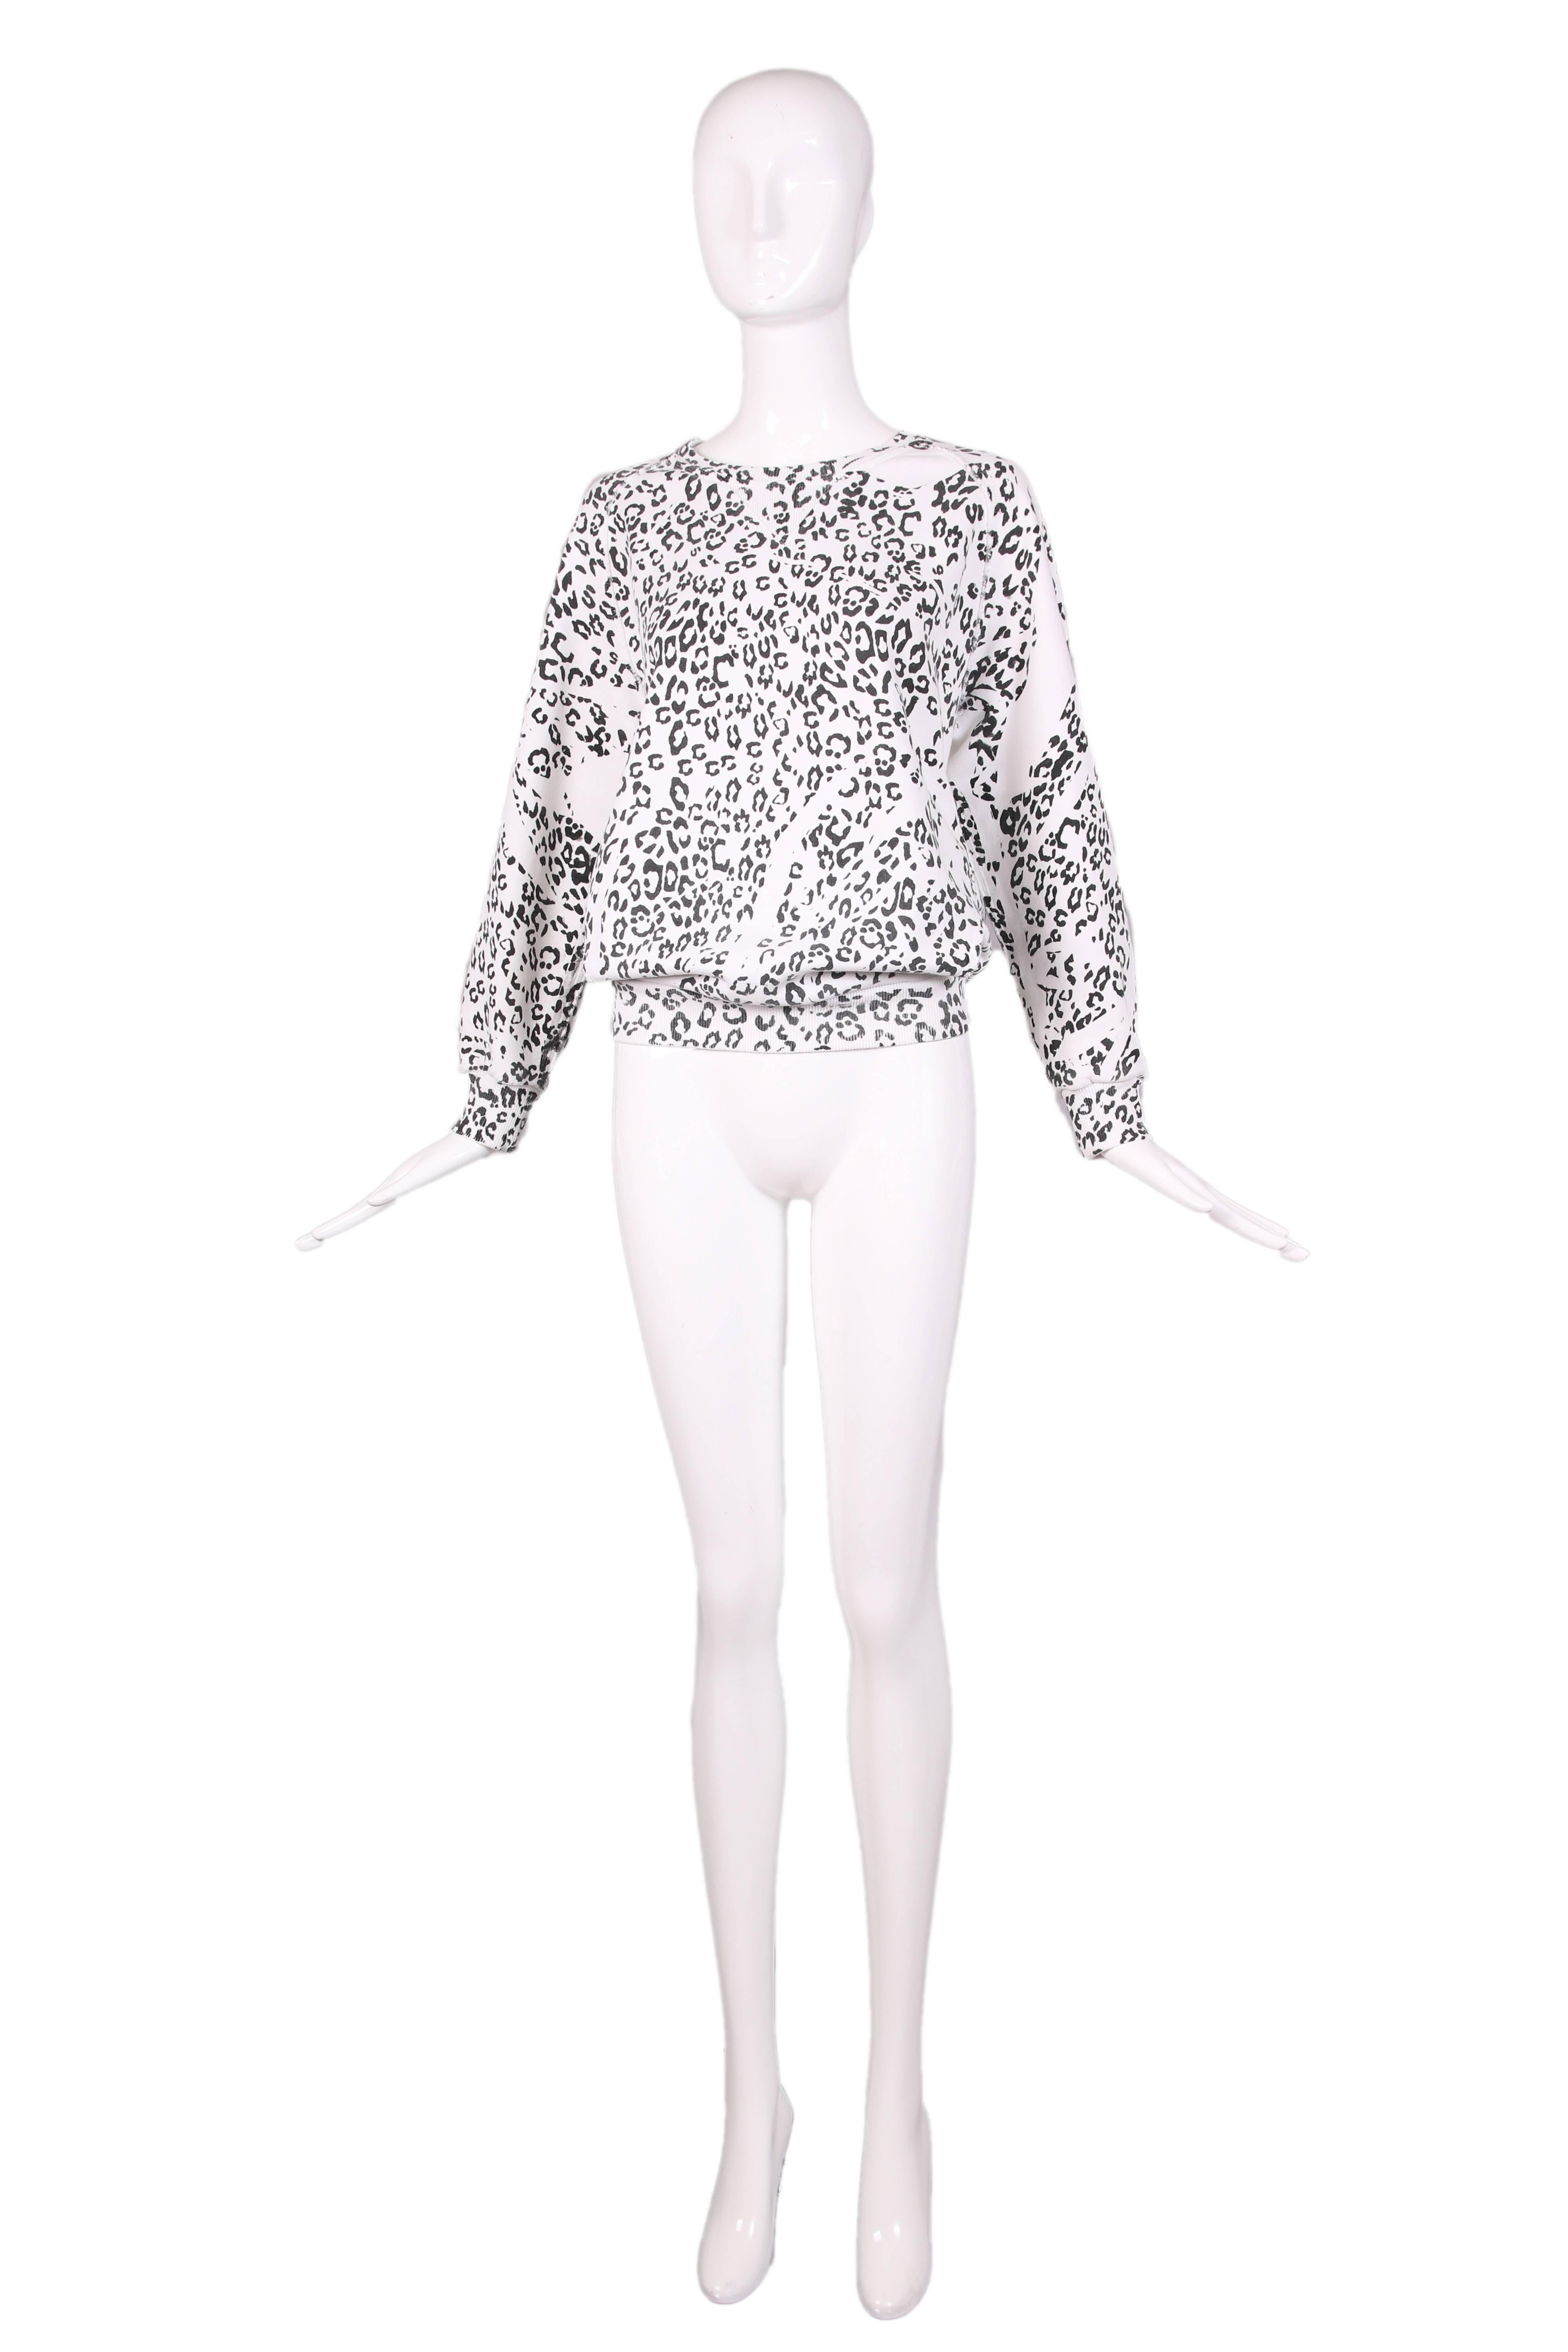 Pierre Balmain black & white leopard print sweatshirt with long sleeves, scooped neck, and front pocket. In excellent condition. Size XS.
MEASUREMENTS:
Bust - 43